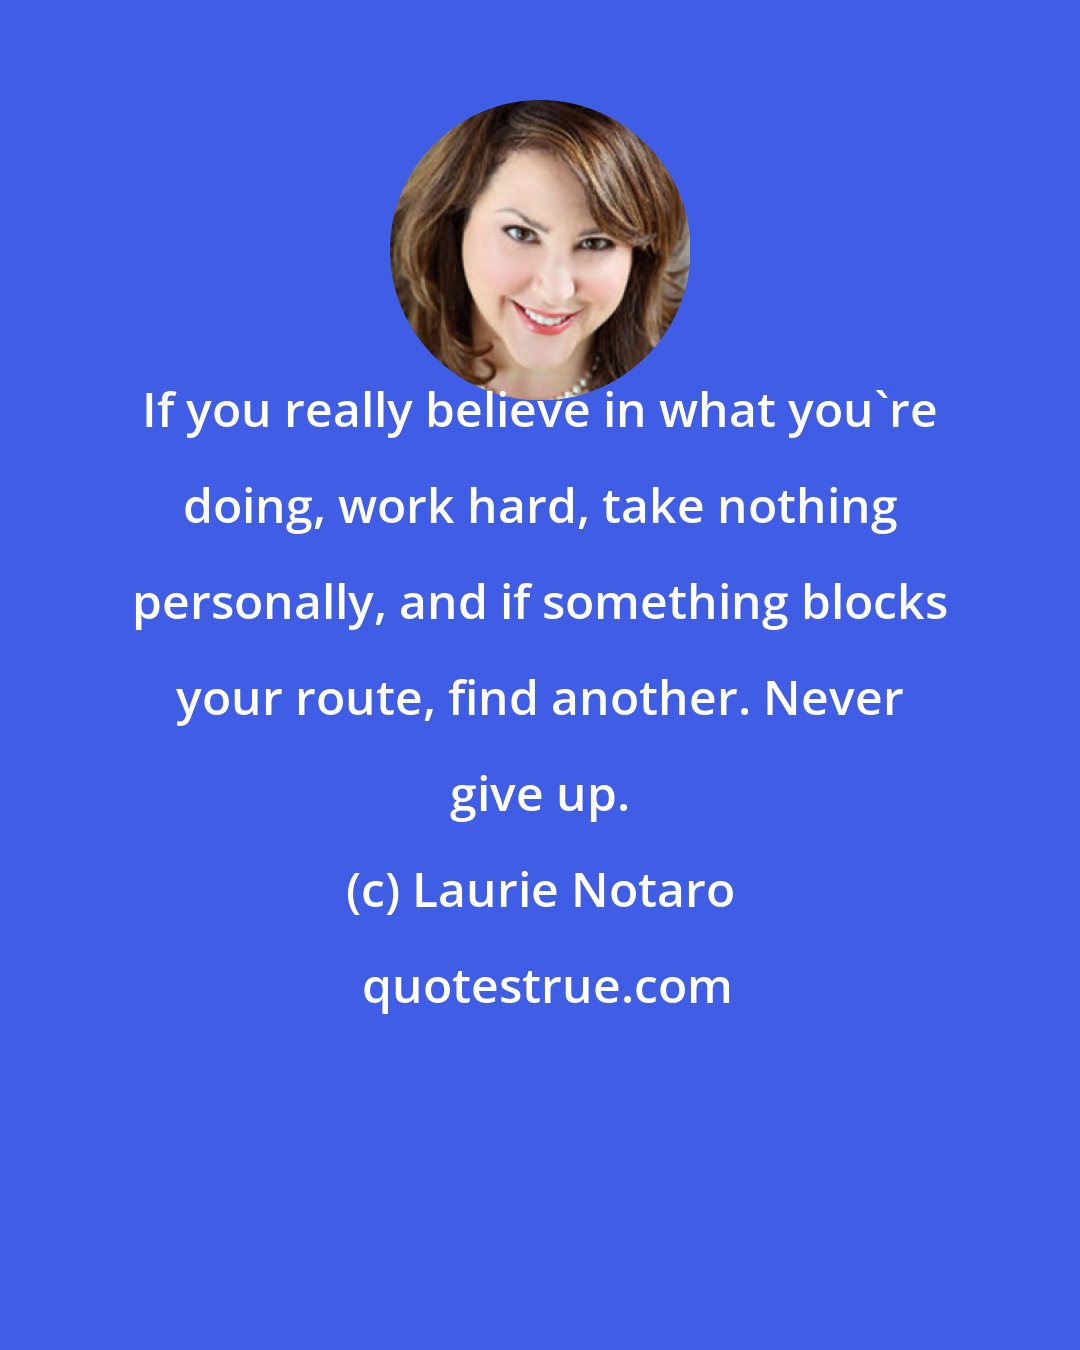 Laurie Notaro: If you really believe in what you're doing, work hard, take nothing personally, and if something blocks your route, find another. Never give up.